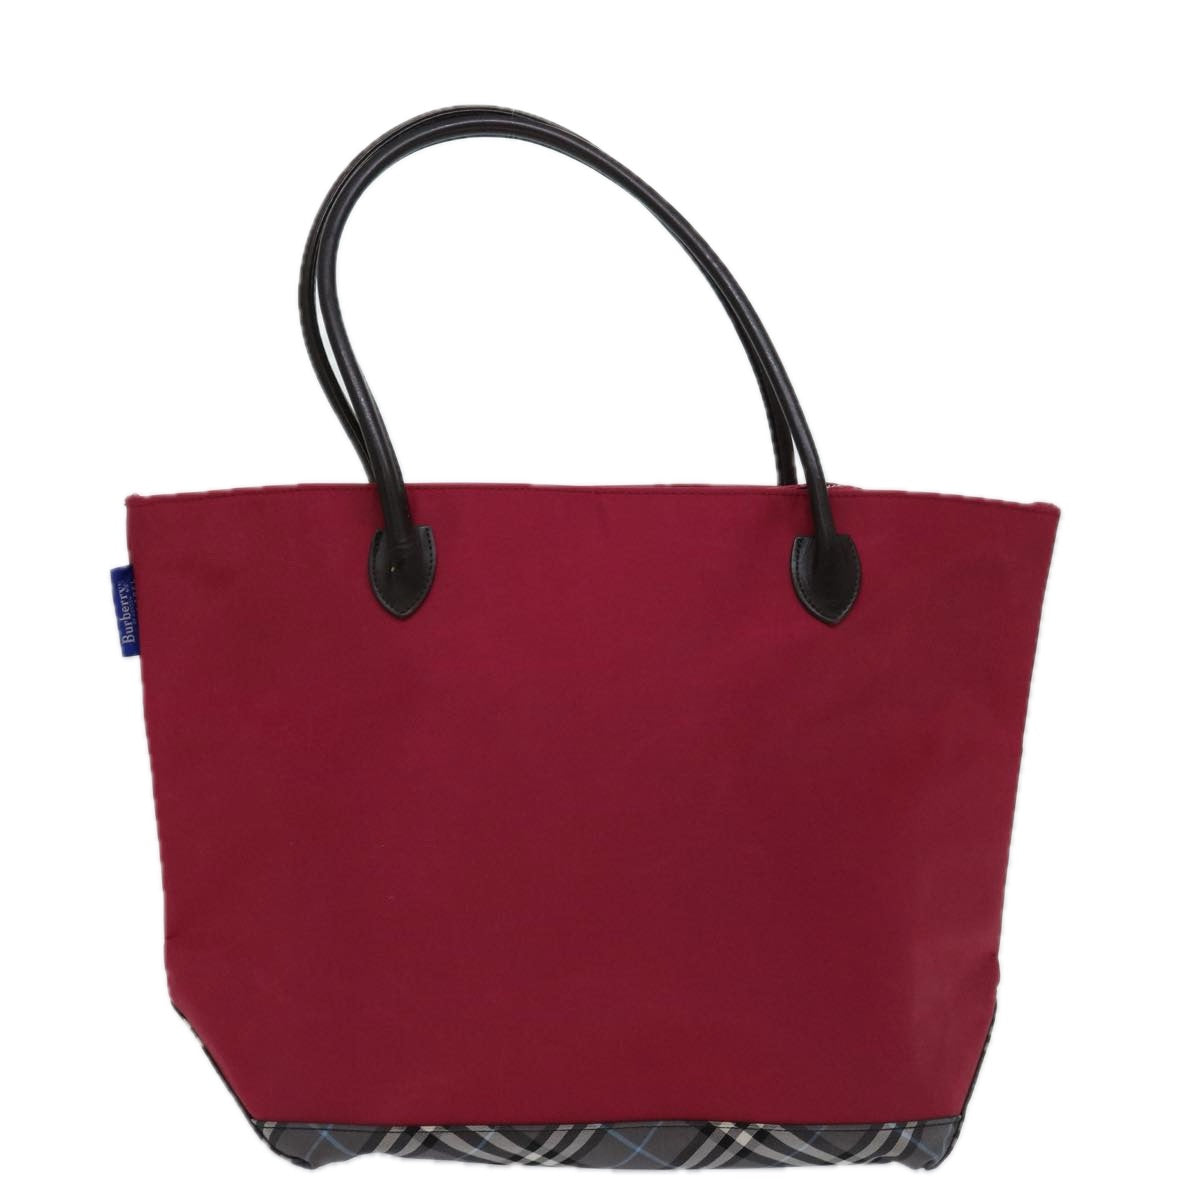 Burberrys Blue Label Tote Bag Nylon Red Auth 69693